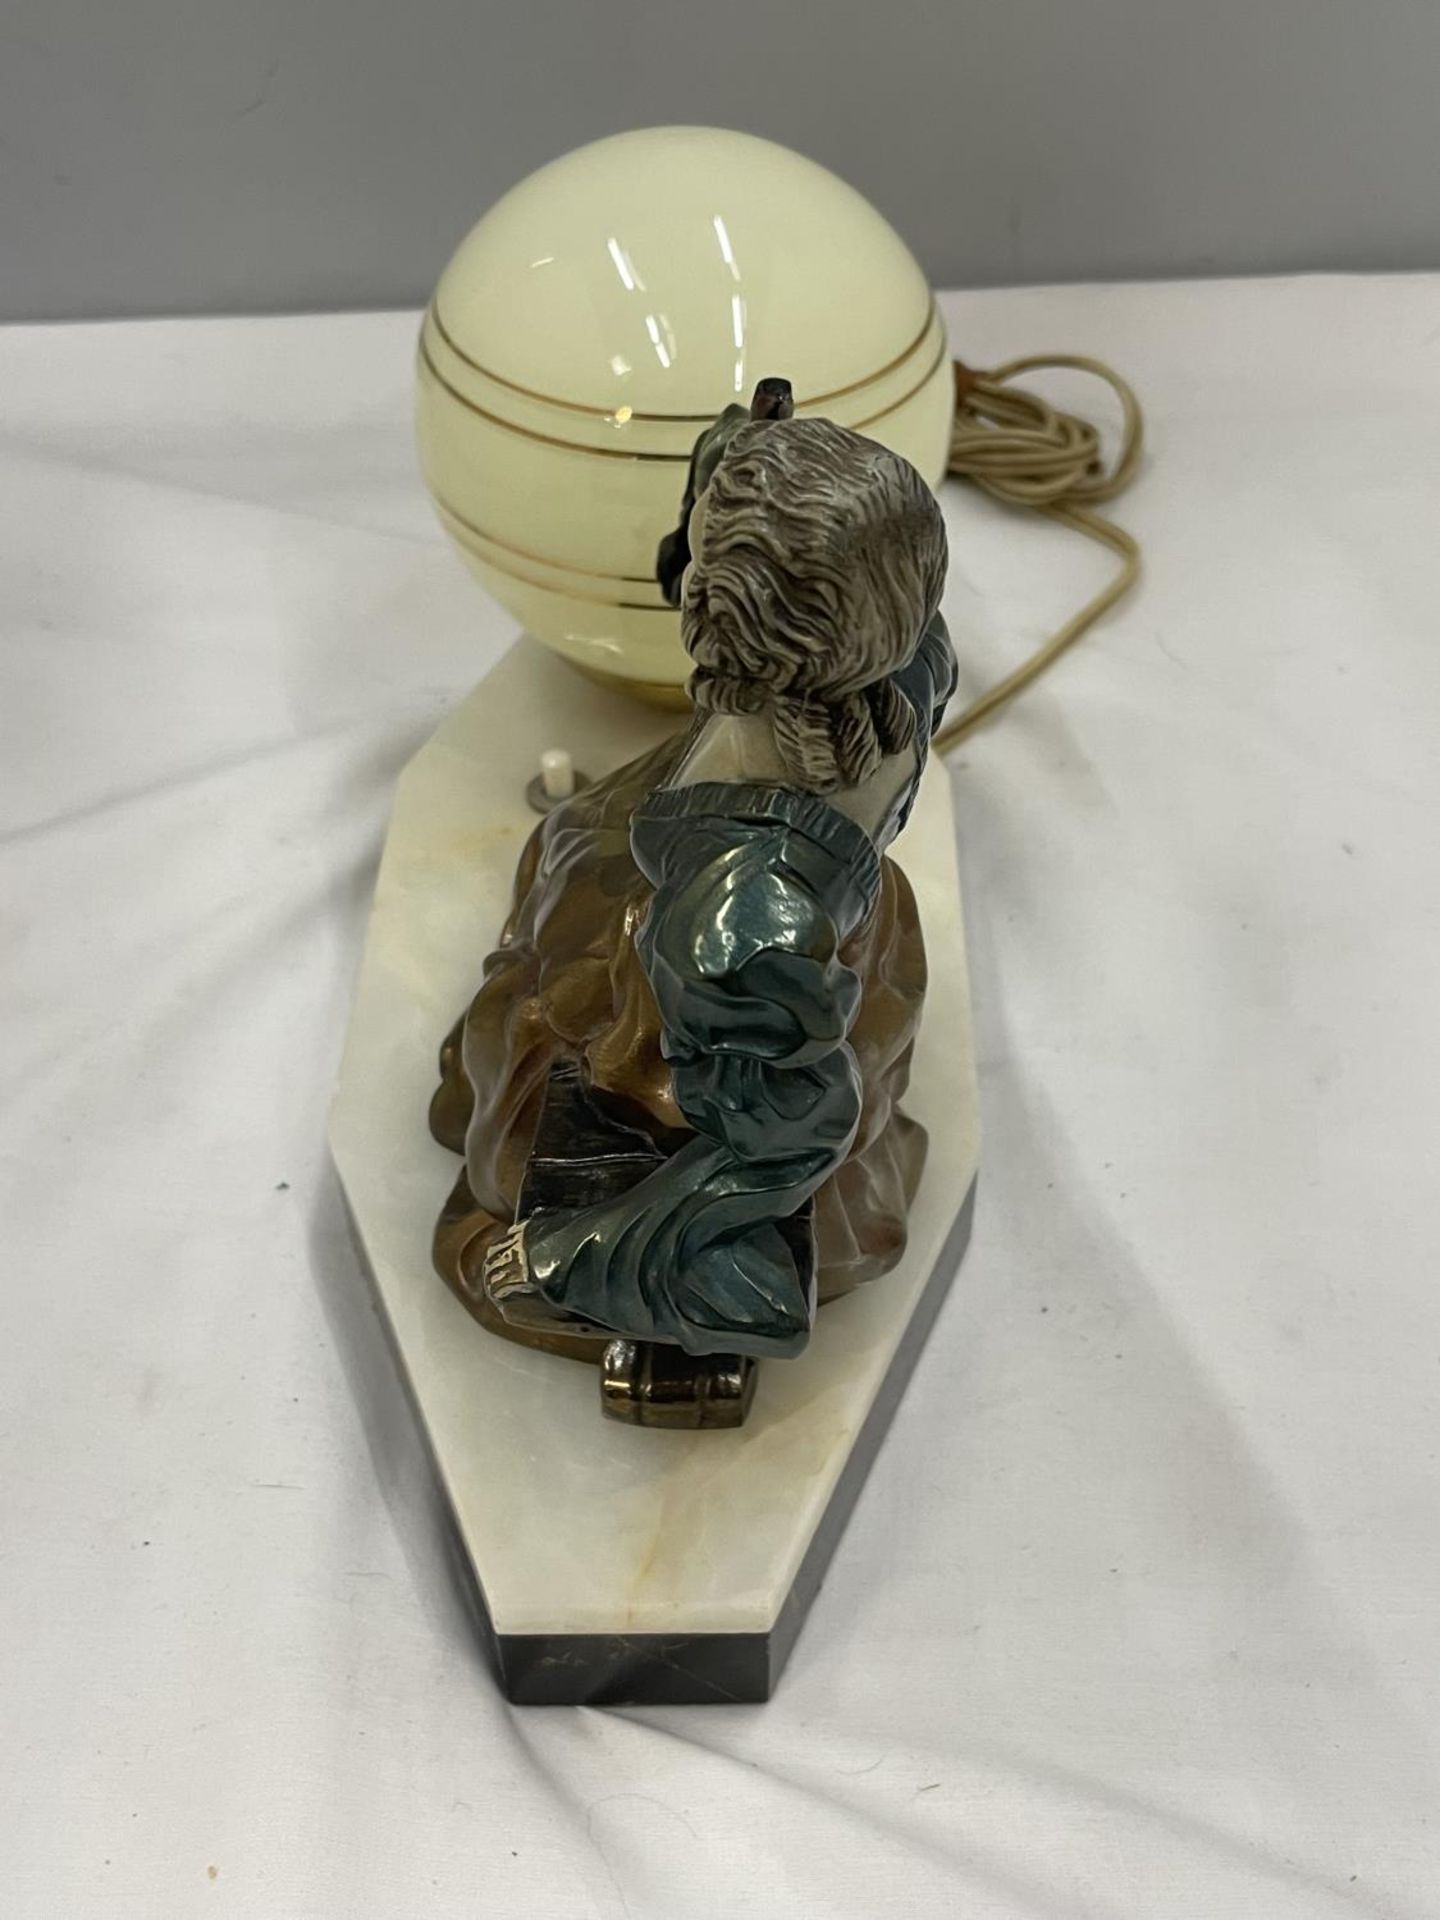 AN UNUSUAL DECO LAMP WITH PIANTED BRASS LADY WITH A PEACOCK, GLOBE SHAPED SHADE ON A MARBLE BASE - Image 2 of 3